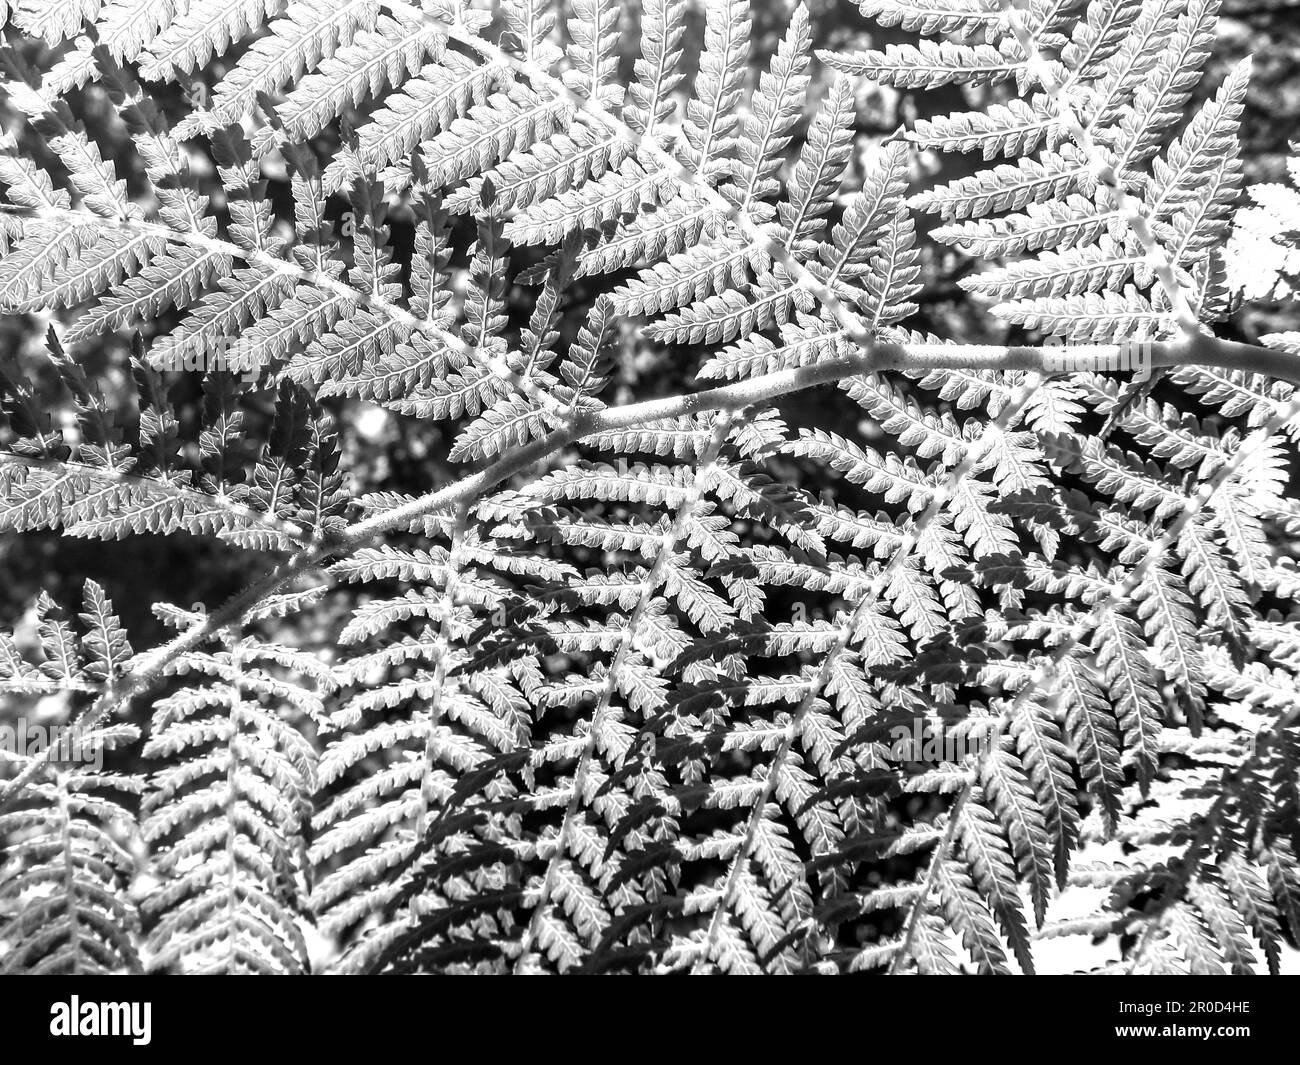 Sunlight shining through a fern leave in Black and White Stock Photo